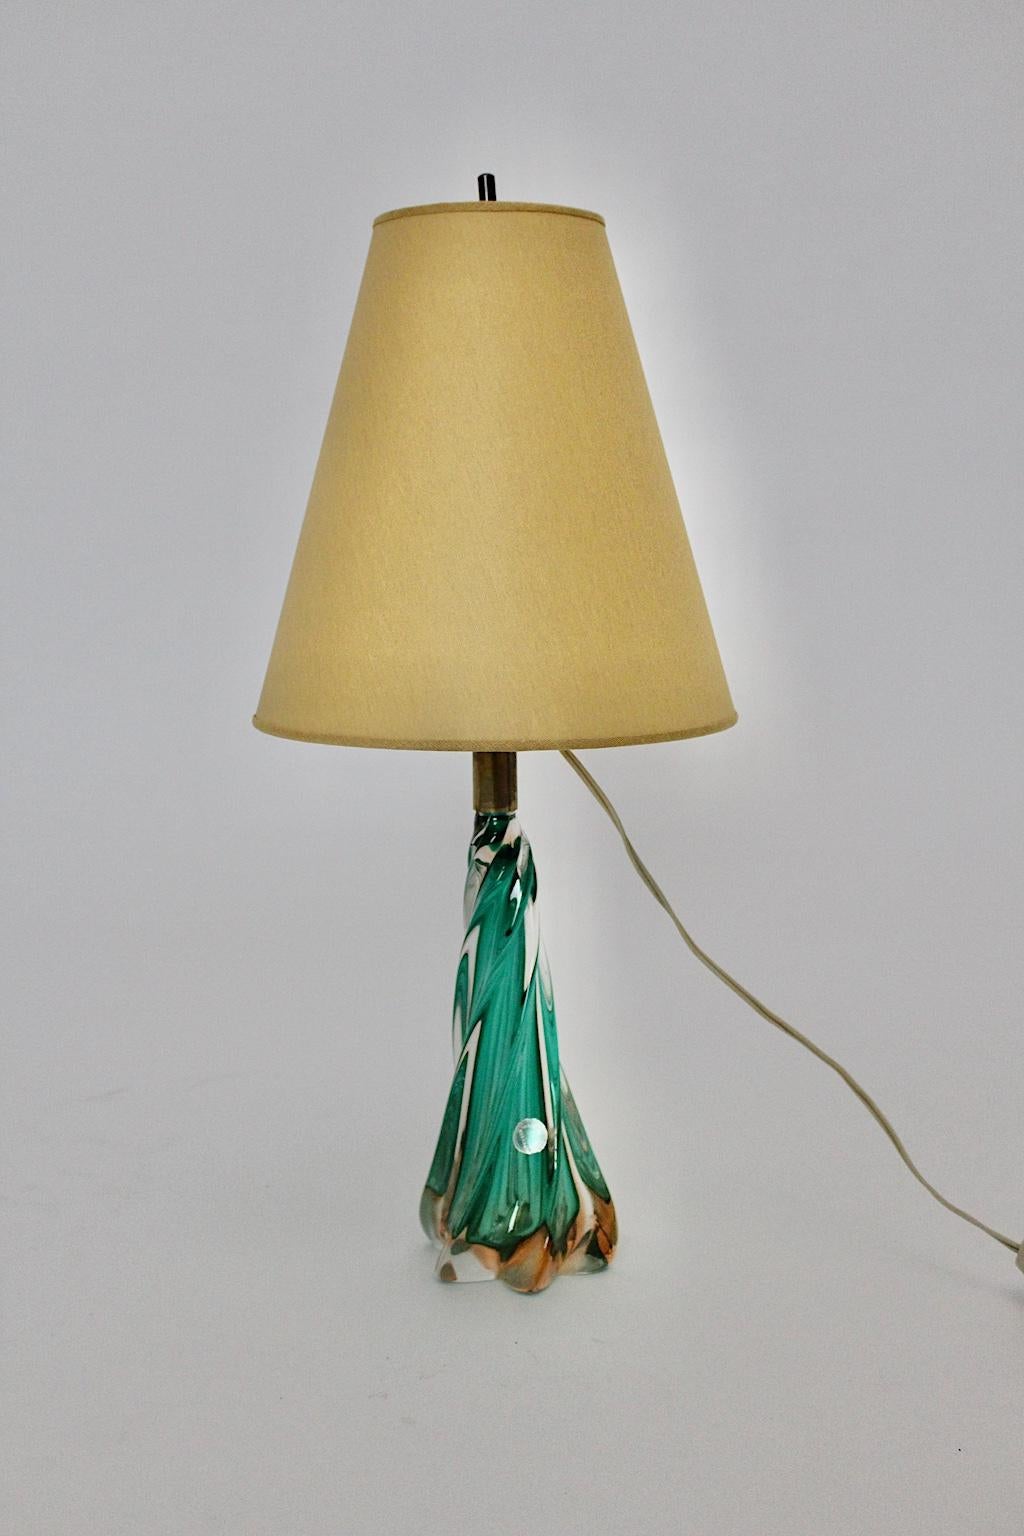 20th Century Mid-Century Modern Vintage Glass Green Gold Table Lamp, 1950s, Italy For Sale